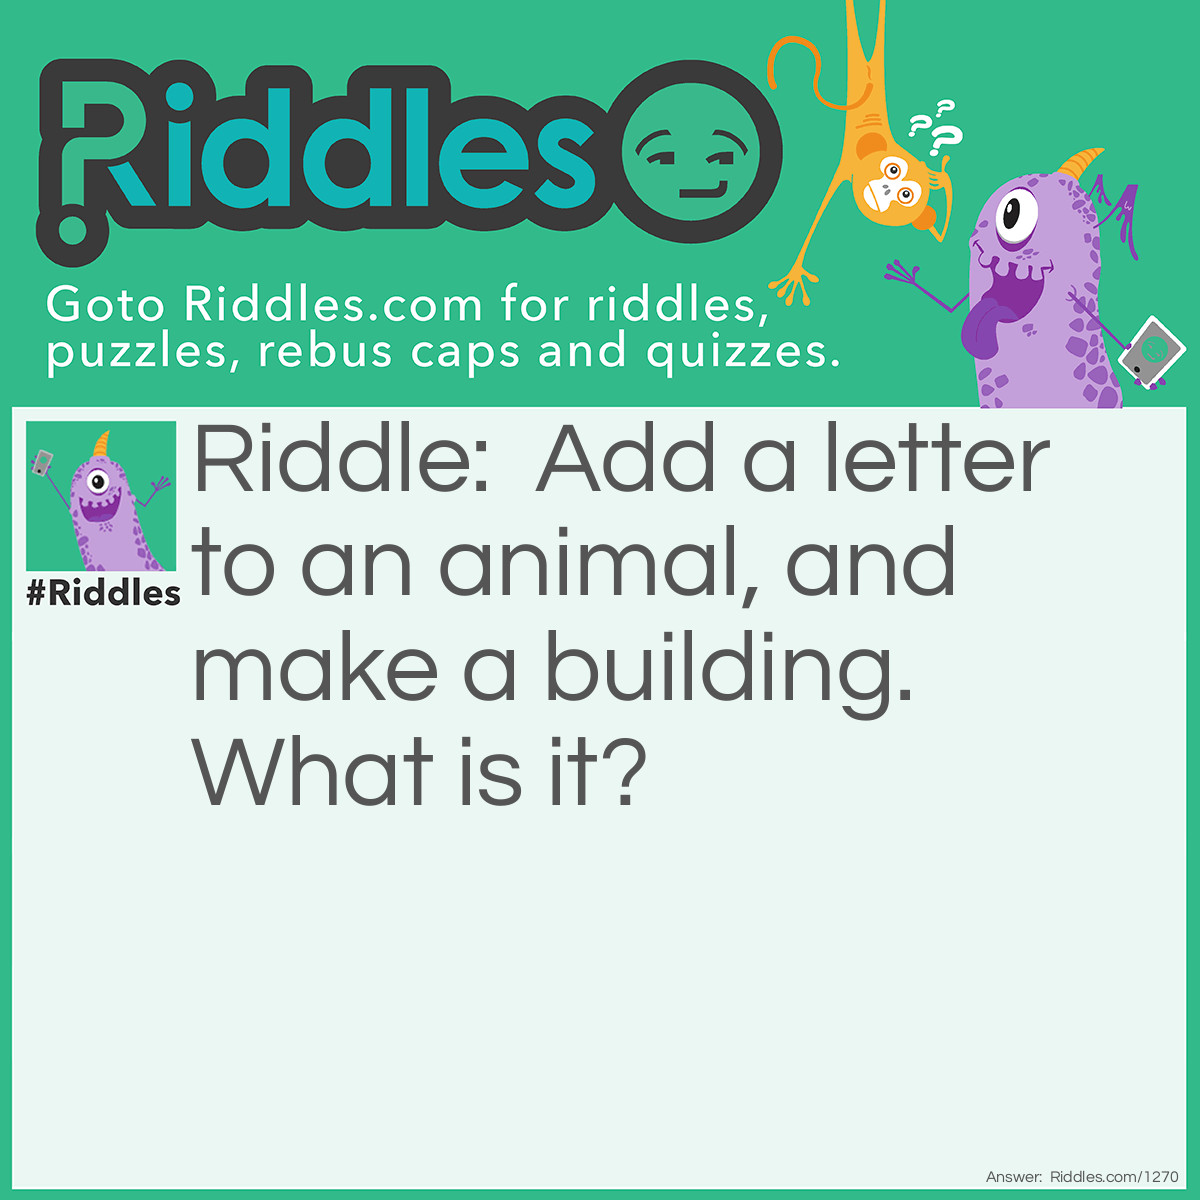 Riddle: Add a letter to an animal, and make a building. What is it? Answer: Sable, stable.